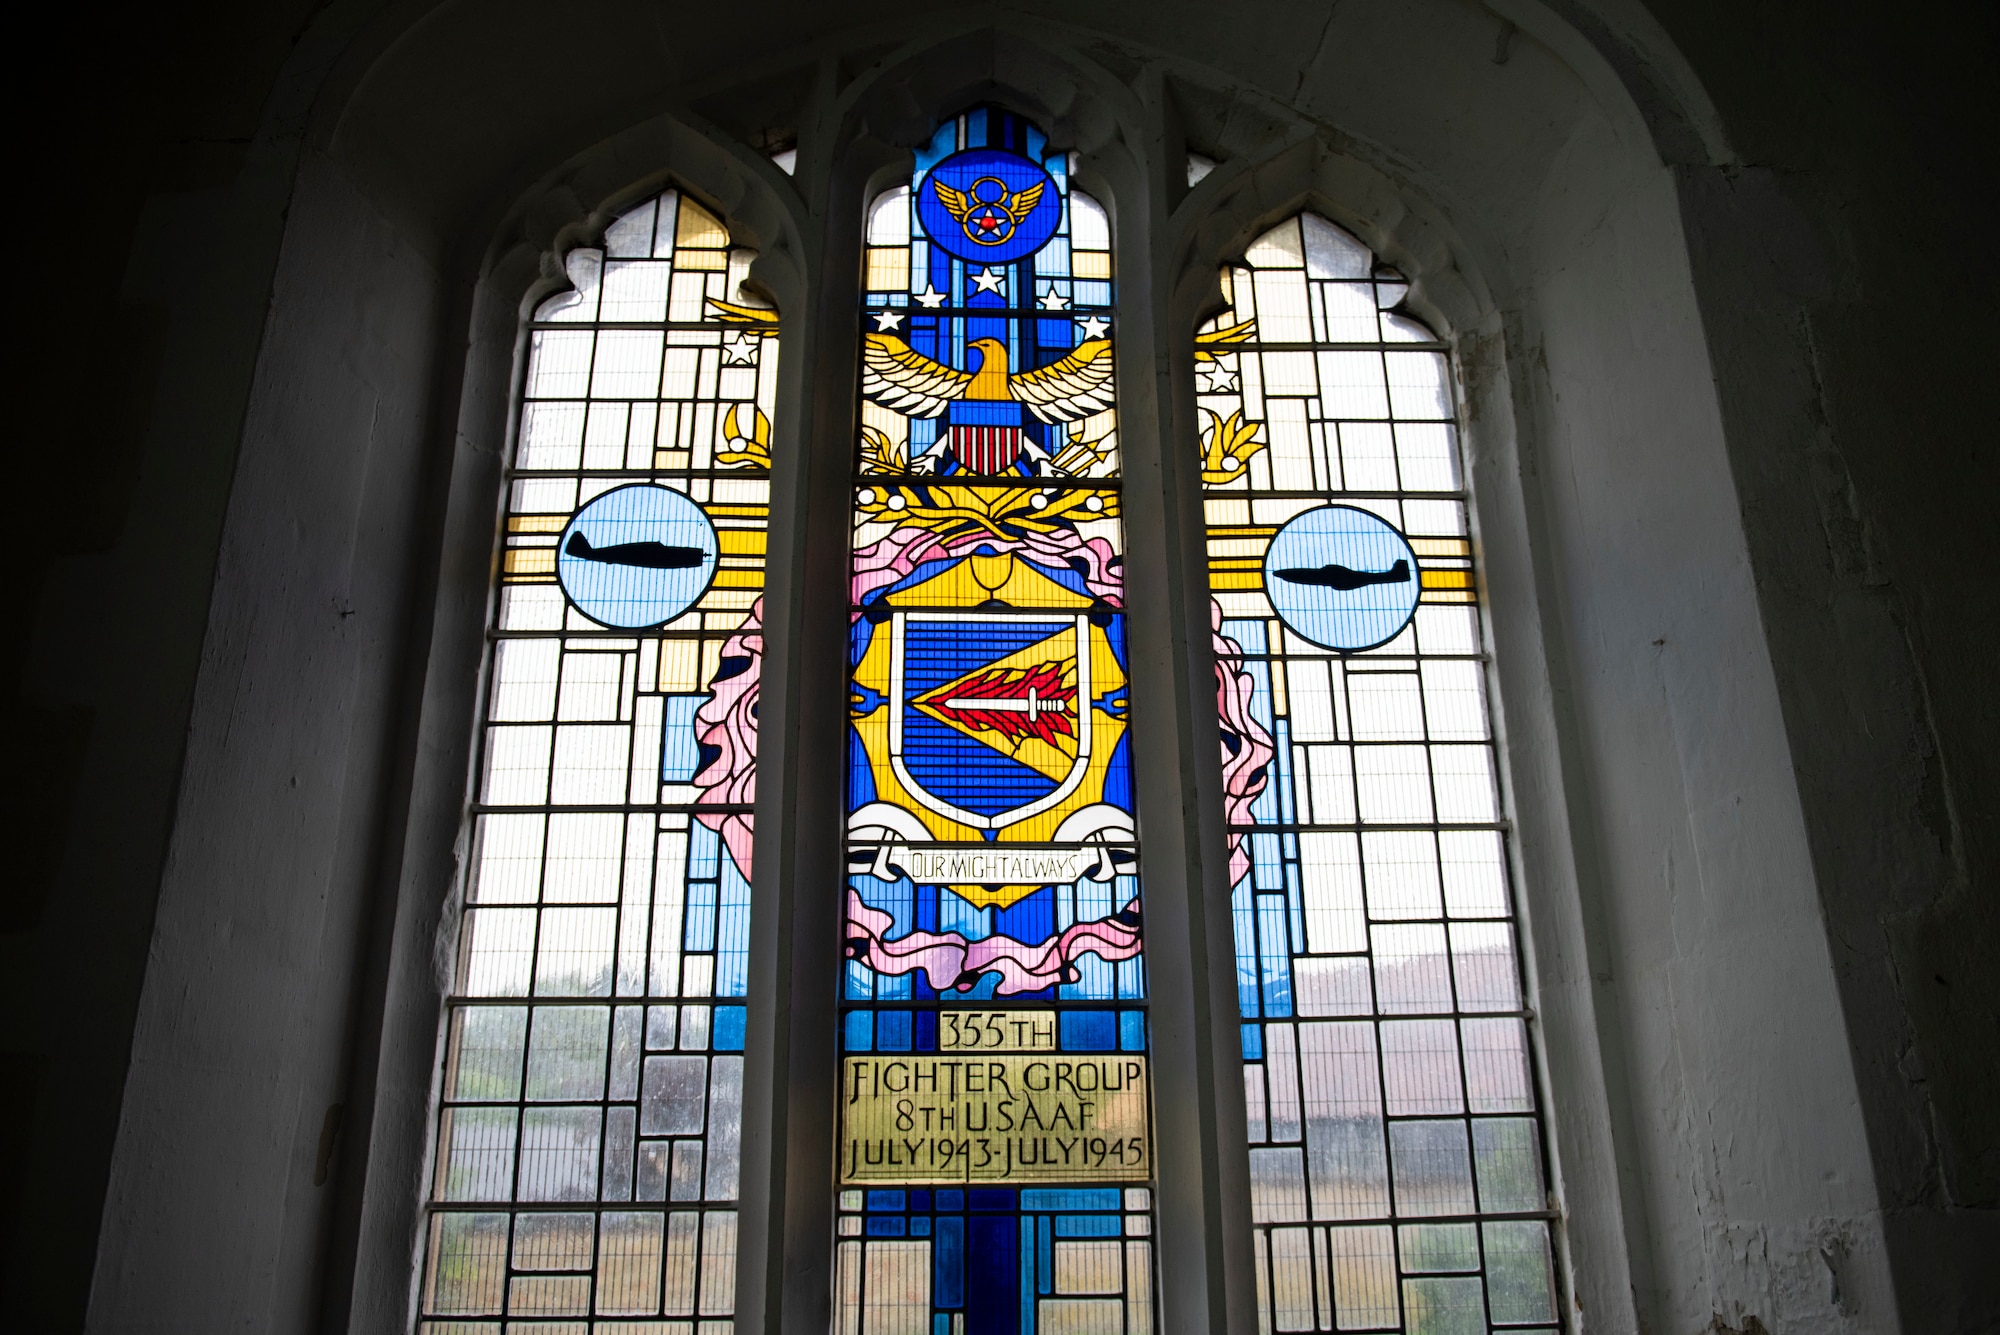 A memorial window at St. Catherine’s Church in Litlington, England, stands to commemorate all the American service members who served at RAF Steeple Morden. During World War II, 175 of those Airmen died and many became prisoners of war. U.S. Africa Command Directorate for Intelligence at RAF Molesworth partnered with the American Battle Monuments Commission to host Operation TORCH-2020, where over 50 military members and their families, U.K. nationals and Boy Scout Troop #245, cleaned six WWII memorial sites to preserve American service member legacies and promote an appreciation of past American heroes among present-day USAFRICOM workforce and families. (U.S. Air Force Photo by Airman 1st Class Jennifer Zima)